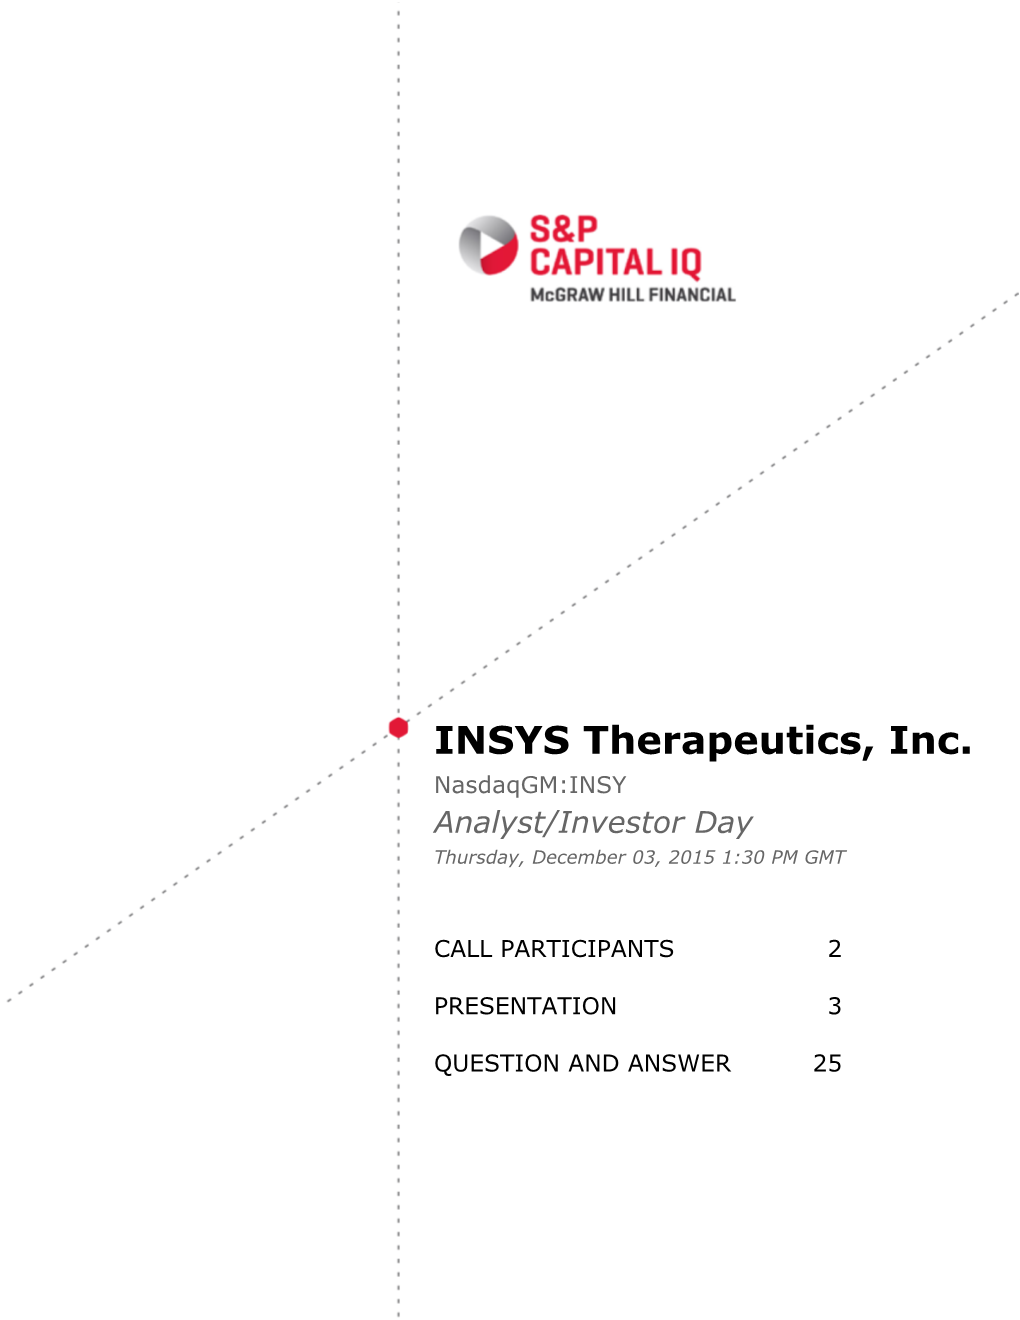 INSYS Therapeutics, Inc. Nasdaqgm:INSY Analyst/Investor Day Thursday, December 03, 2015 1:30 PM GMT